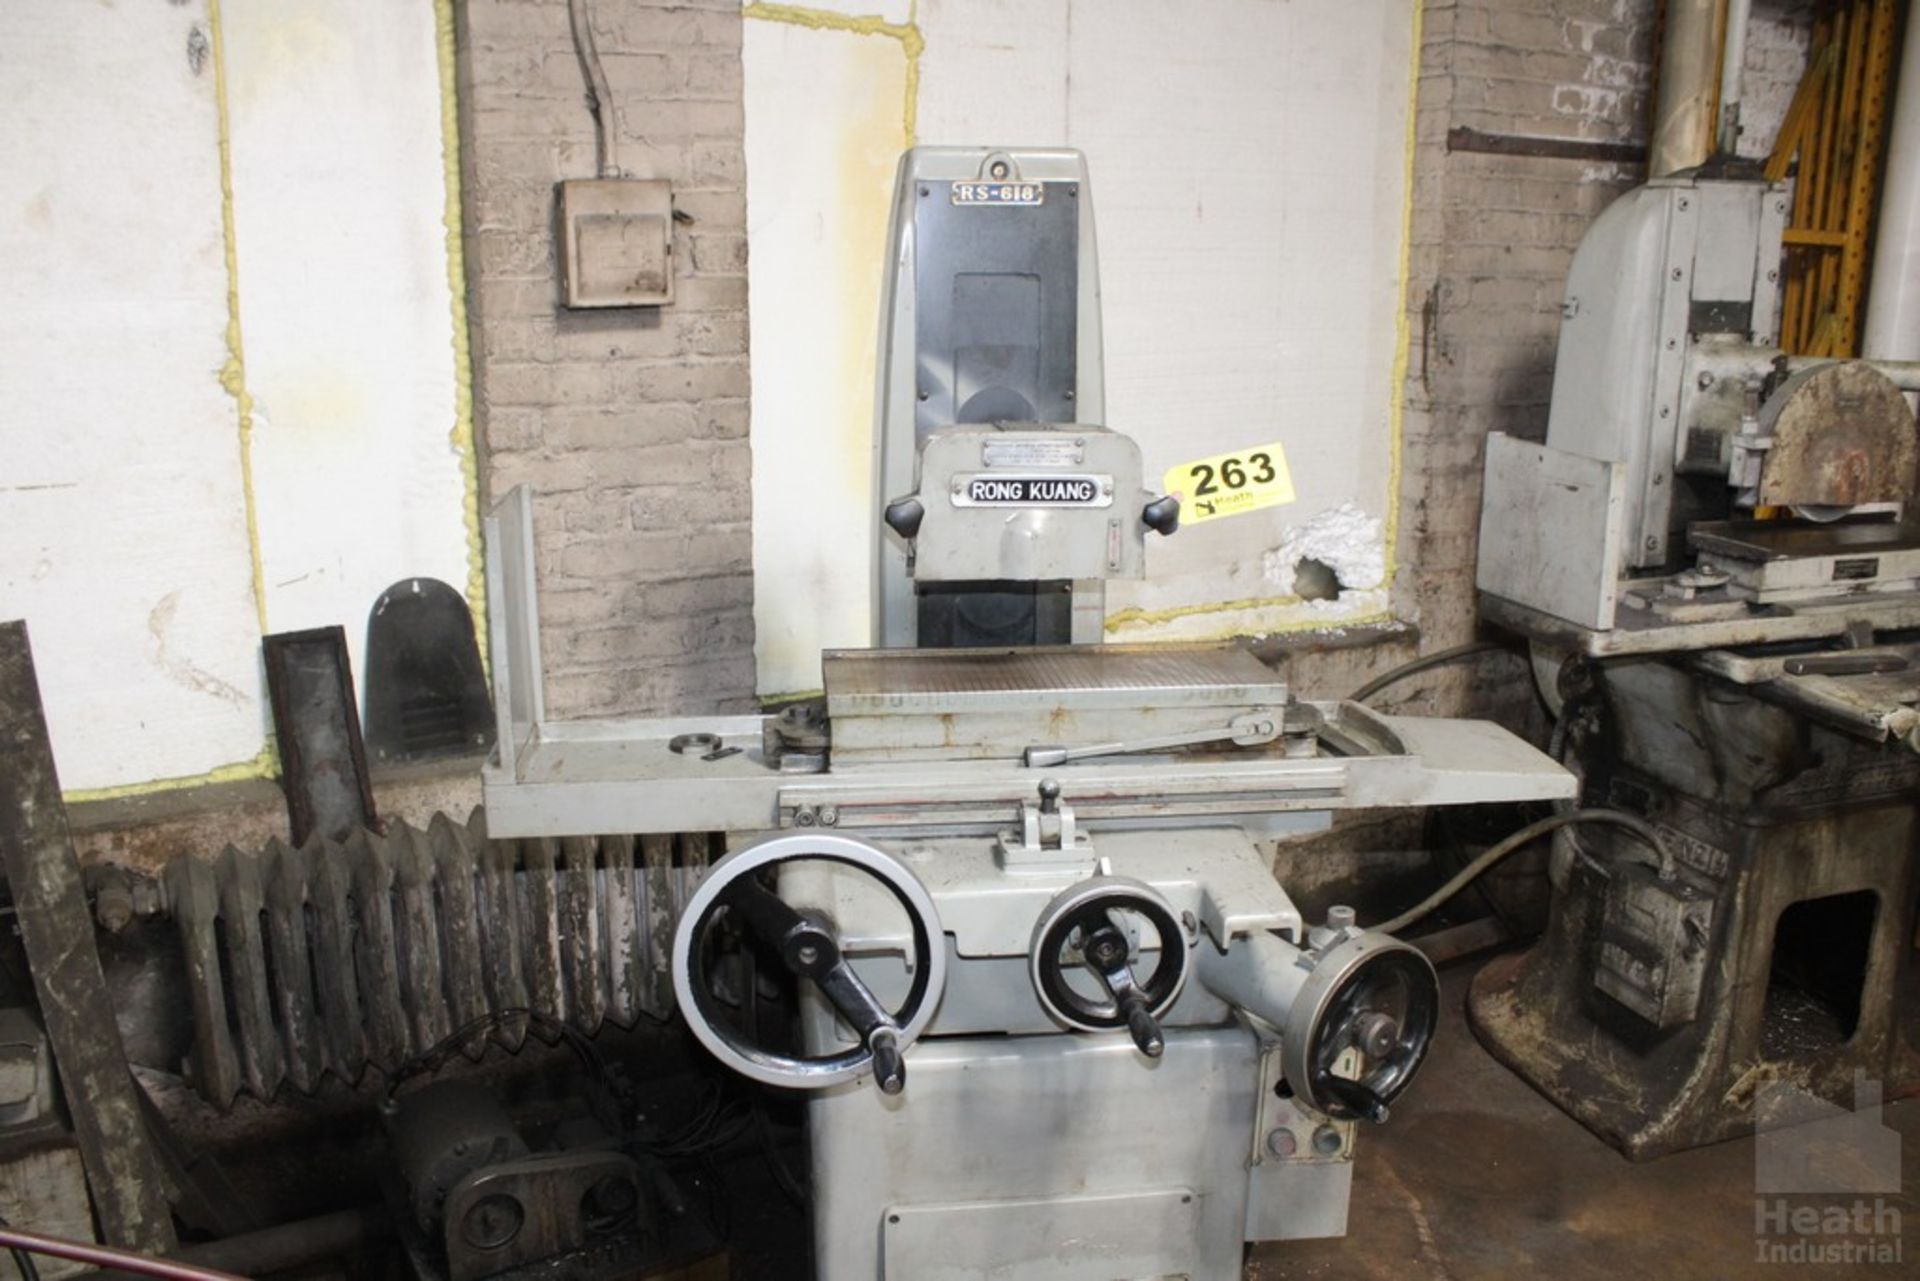 RONG KUANG 6"x18" MODEL RS-618 SURFACE GRINDER, S/N 61545, WITH PERMANENT MAGNETIC CHUCK